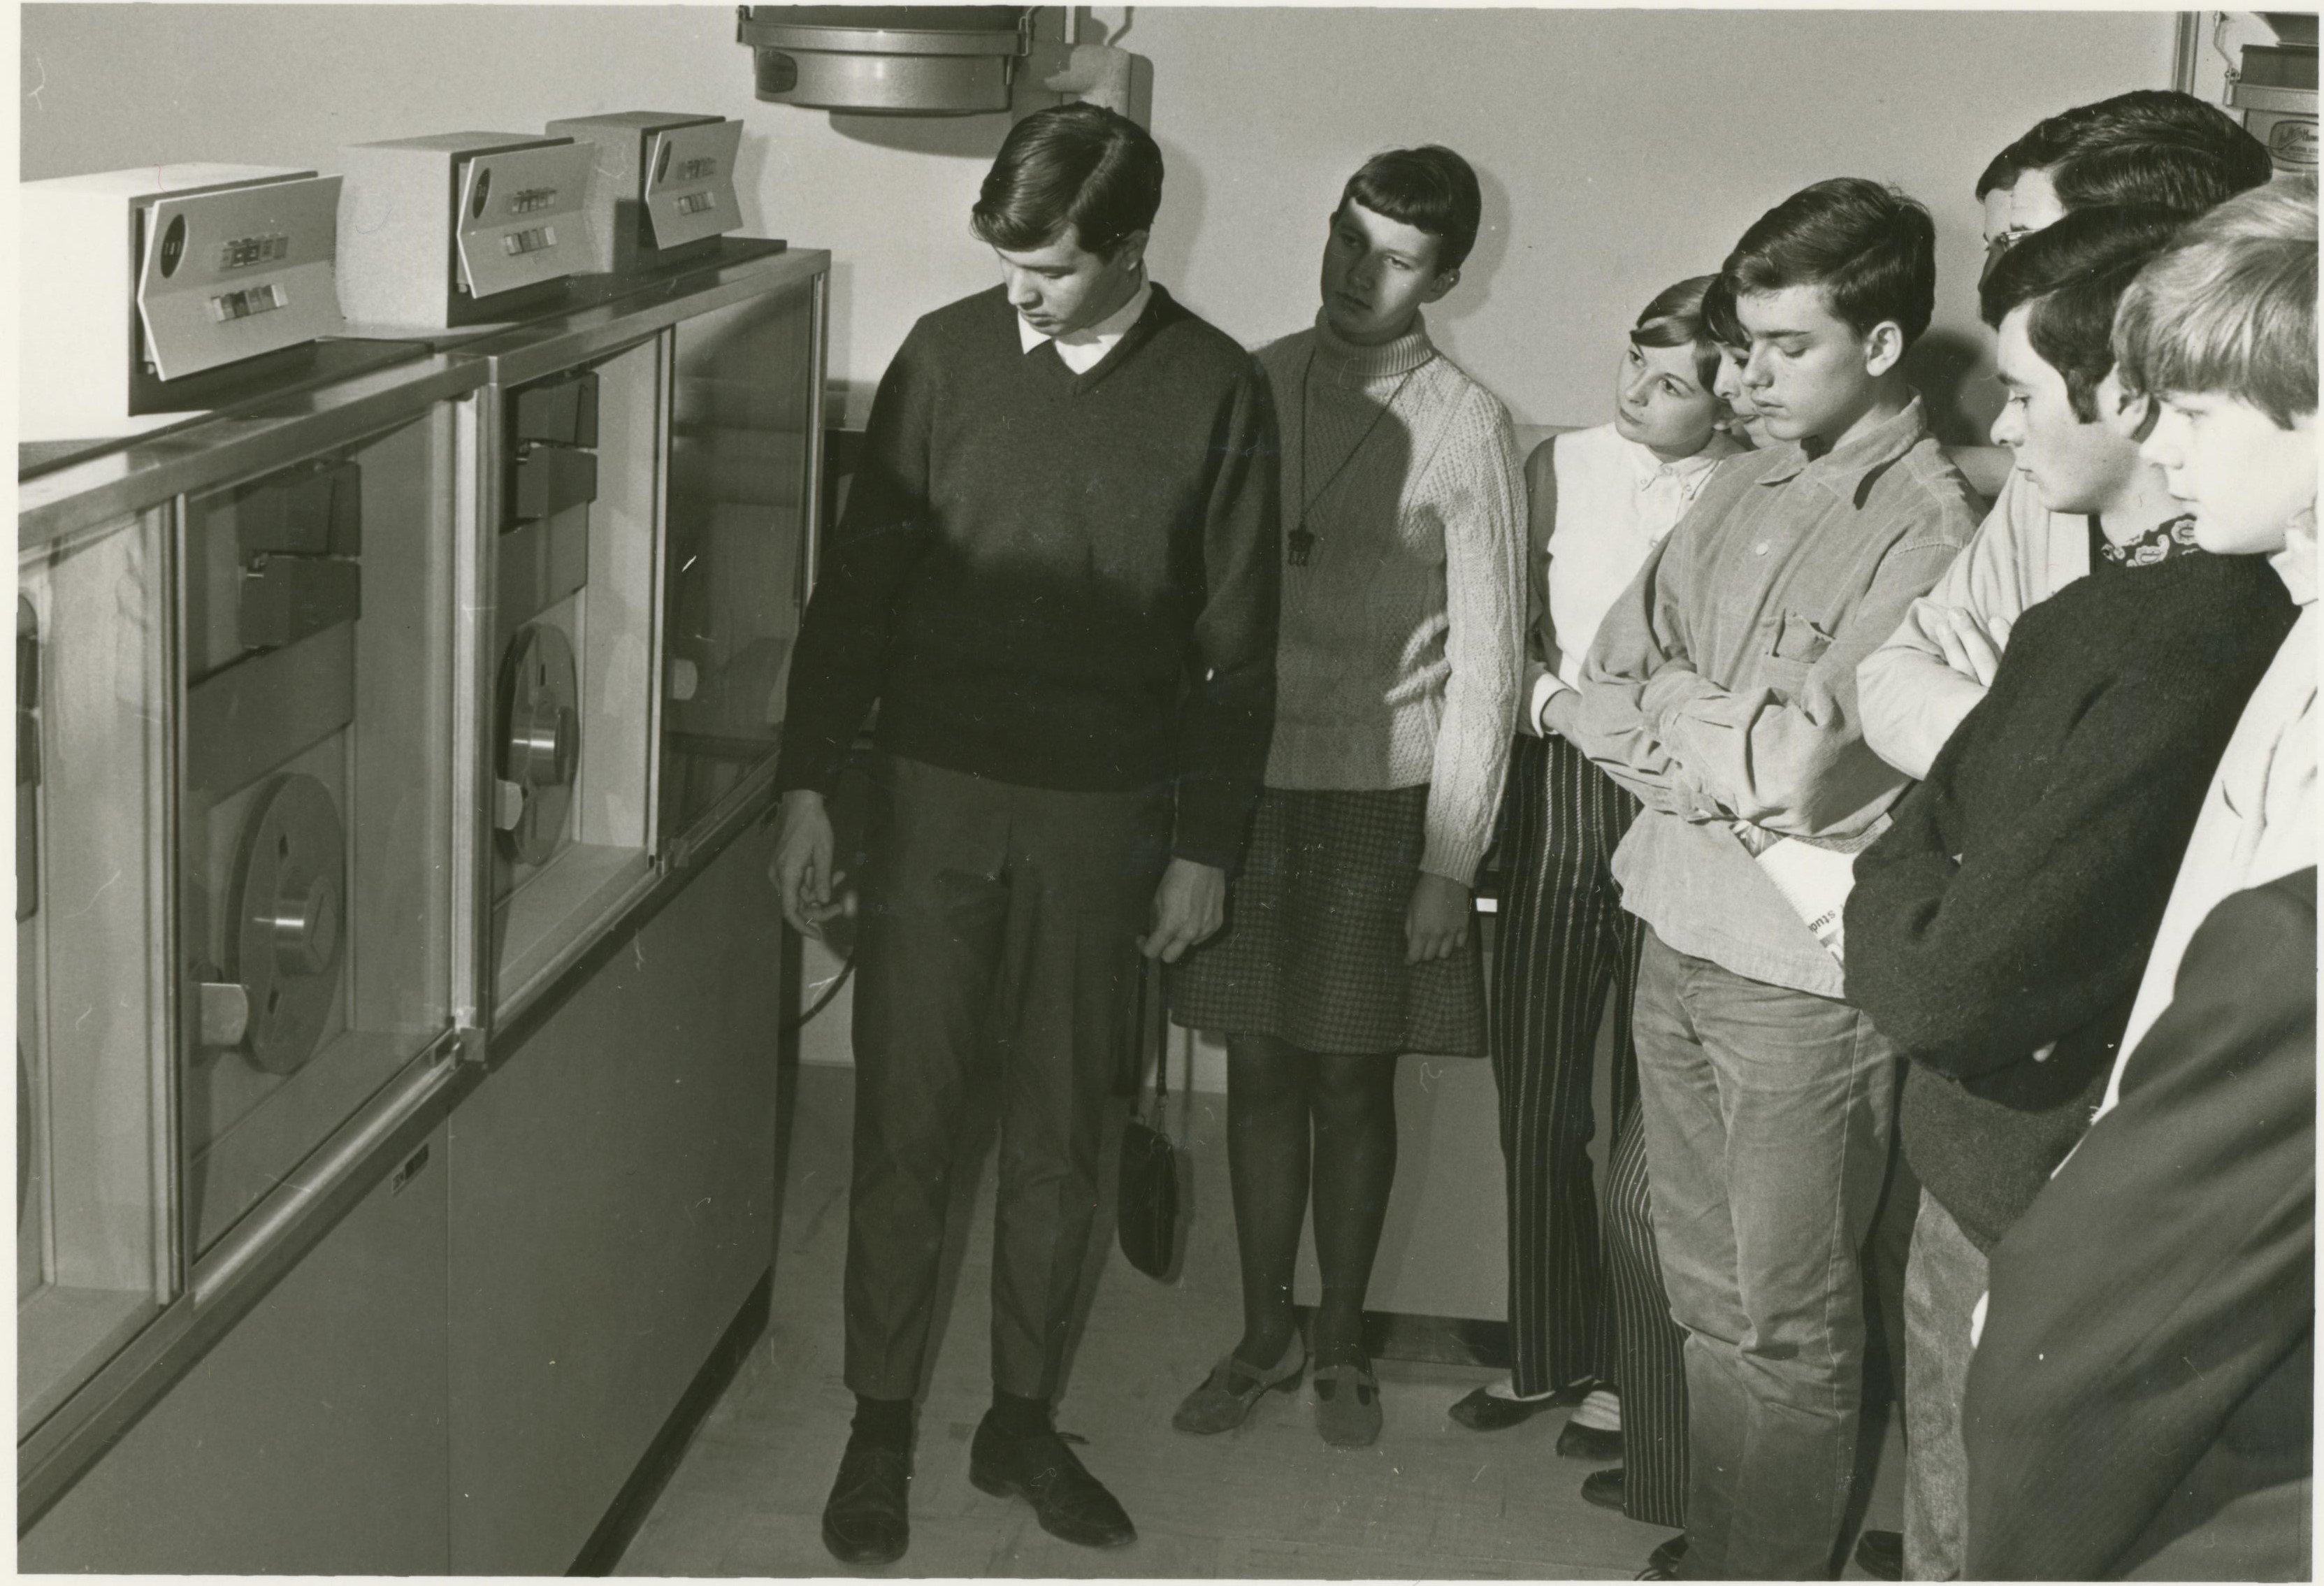 Students in Lakehead's computer room in late 1960s